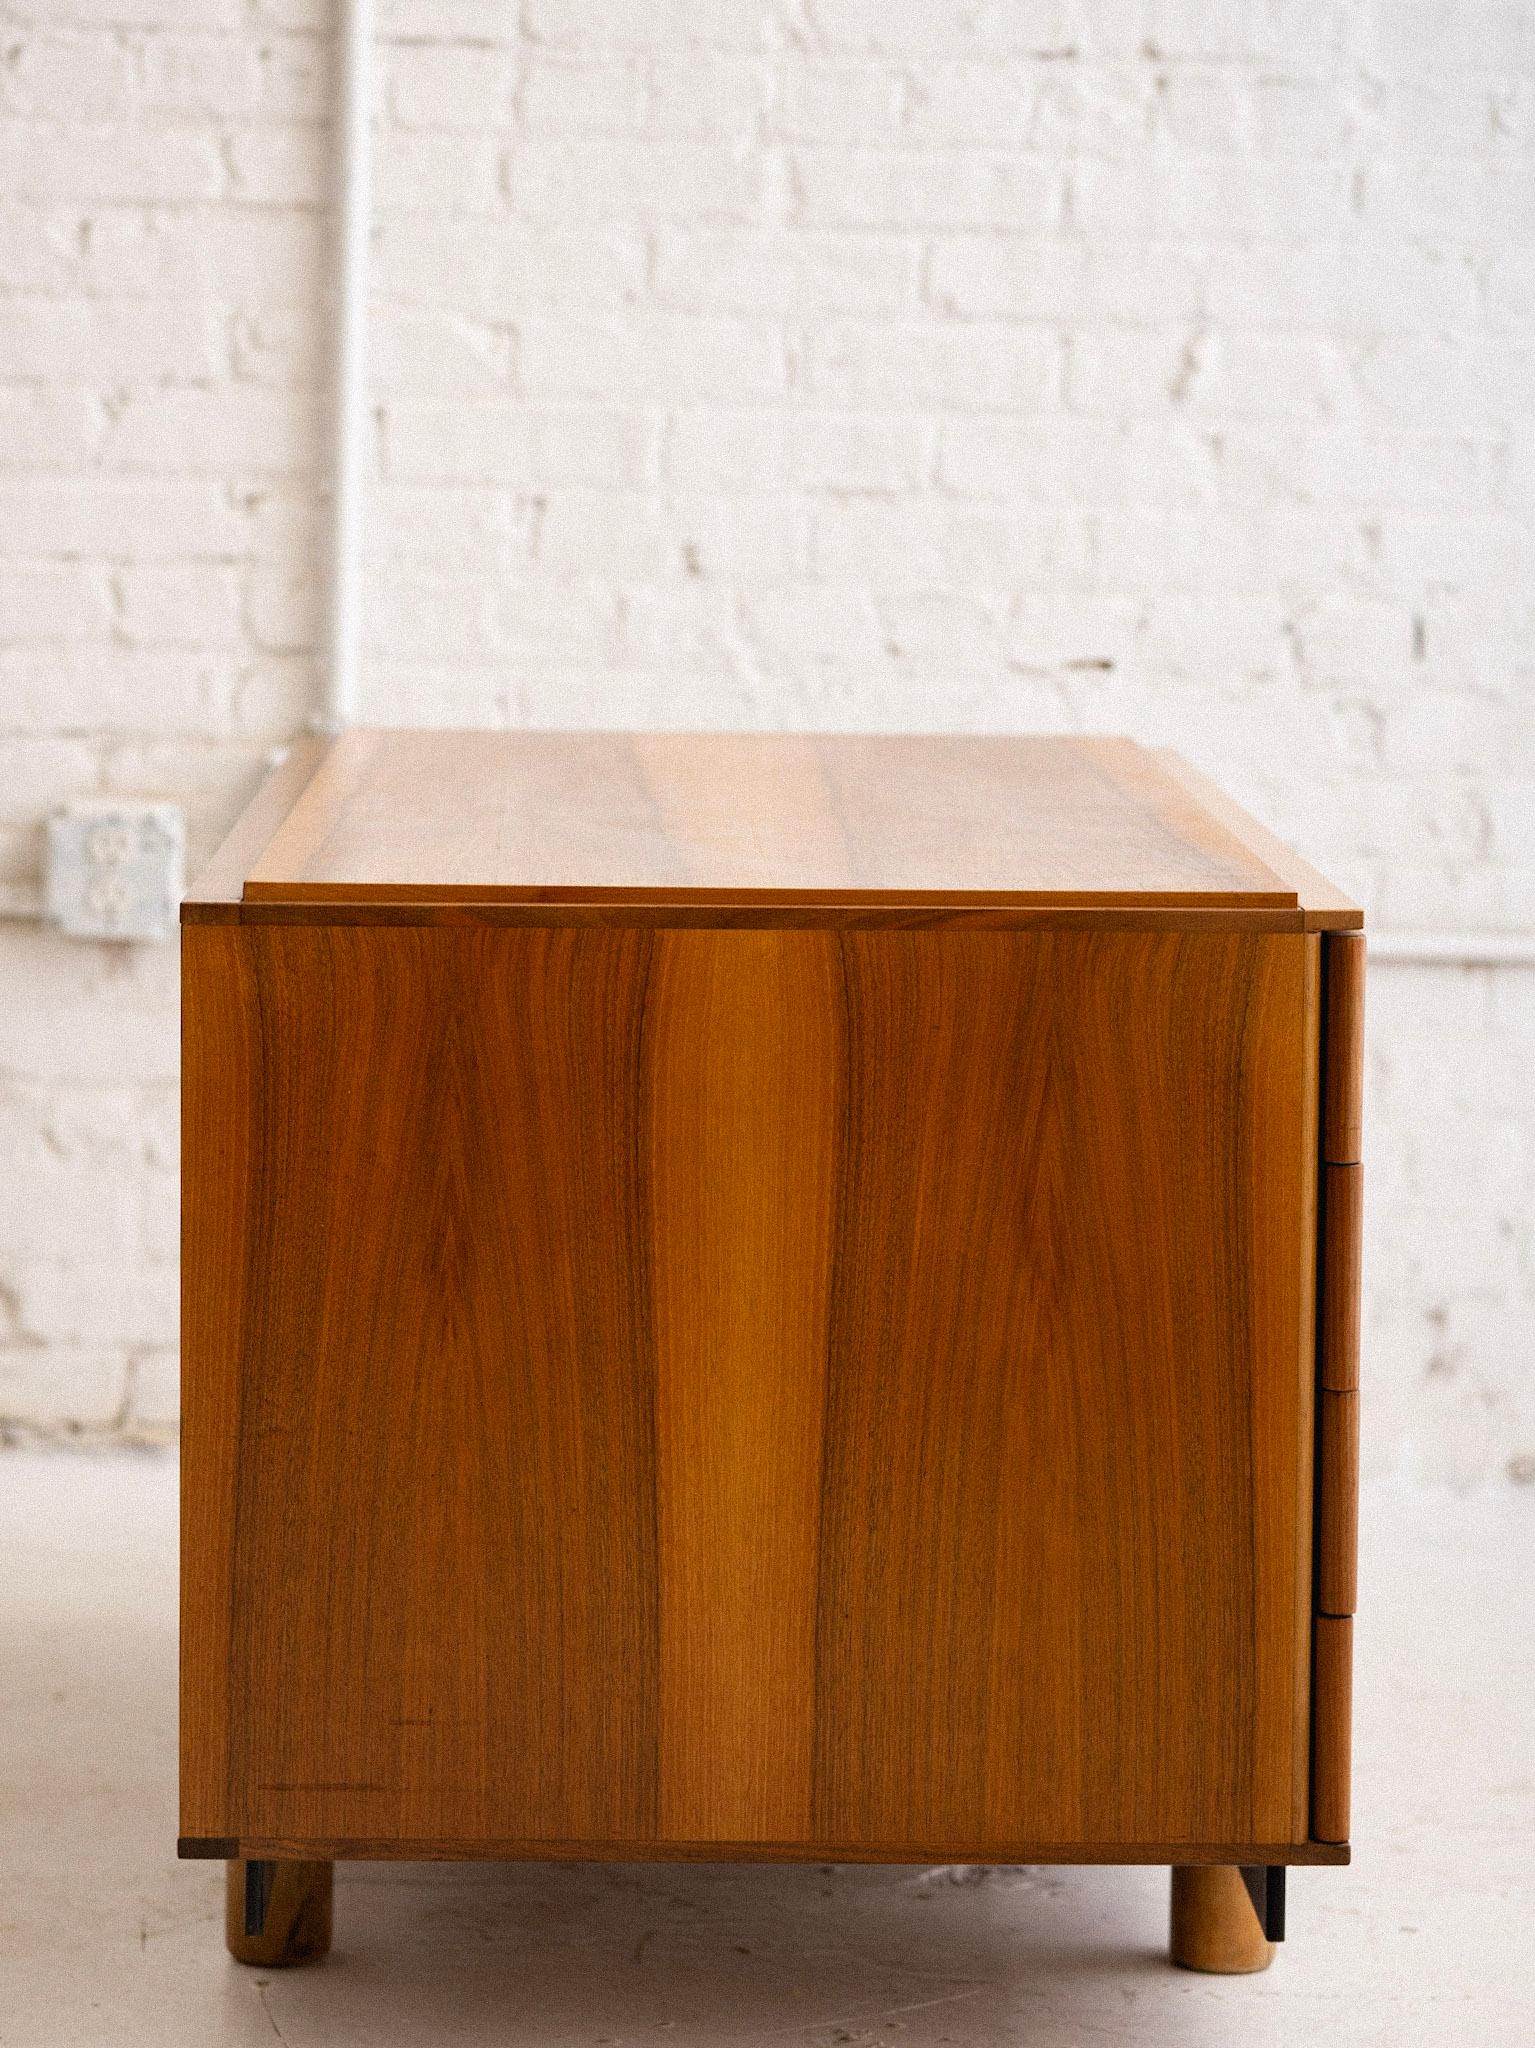 ‘Ovunque 807’ Modular 8 Drawer Sideboard by Gianfranco Frattini for Bernini In Good Condition For Sale In Brooklyn, NY